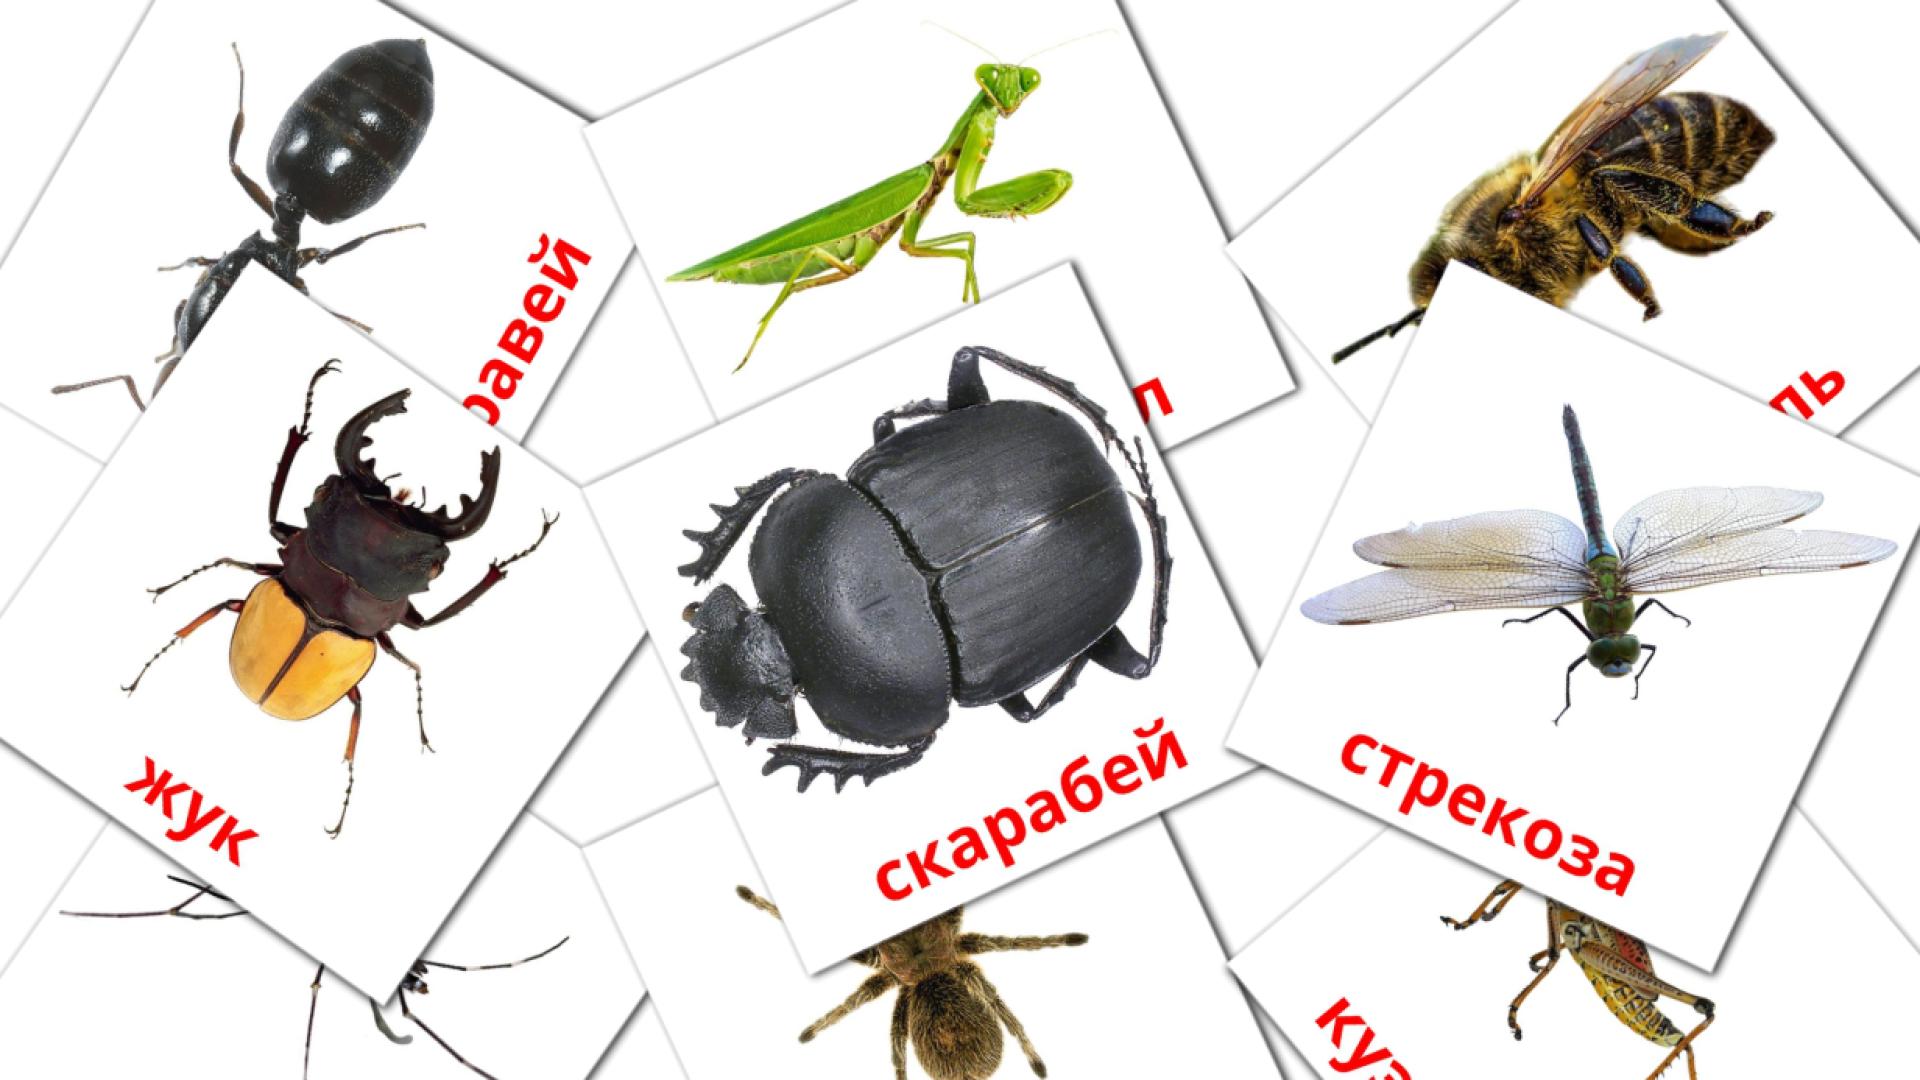 23 Free Insects Flashcards in english (PDF files)